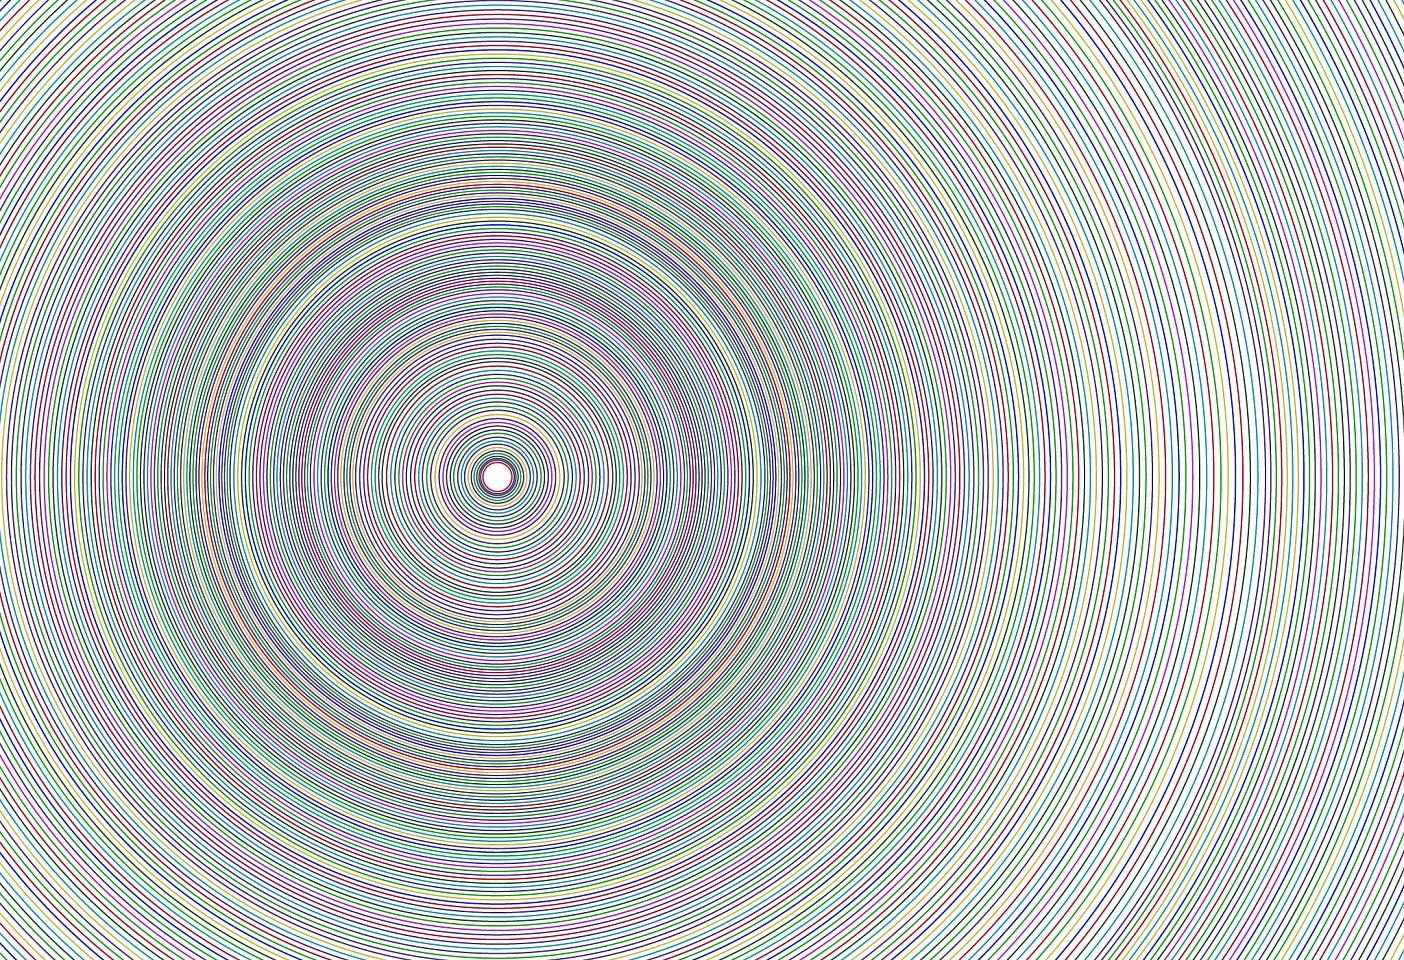 Dane Albert, Circles #40 Multi-Color, 2023
Acrylic on canvas (Concept), 48 x 72 in. (121.9 x 182.9 cm)
Series of colored lines and shapes in multiple configurations
DA.2023-040-multicolor